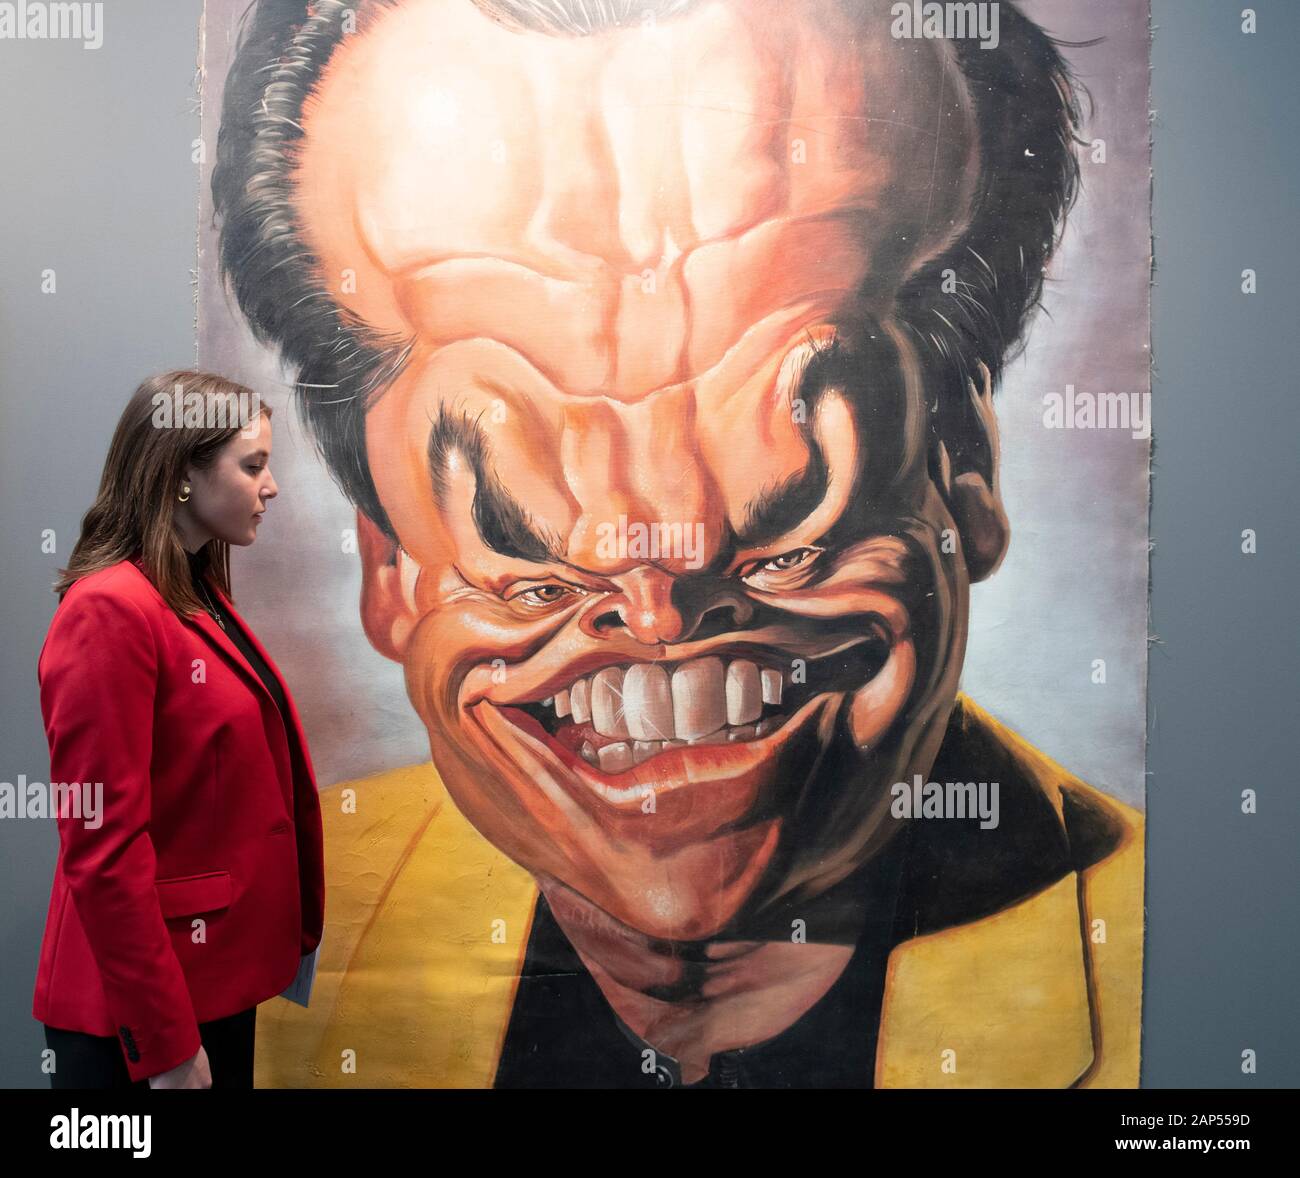 Business Design Centre, Islington, London, UK. 21st January 2020. London Art Fair showcases exceptional modern and contemporary art of our time, to discover and to buy. The Fair is an established destination for both museum quality modern and contemporary work, from prints and editions to major works by internationally renowned artists. Image: Sebastian Kruger. Jack Nicholson, 1991. Christopher Kingzett Gallery. Credit: Malcolm Park/Alamy Live News. Stock Photo